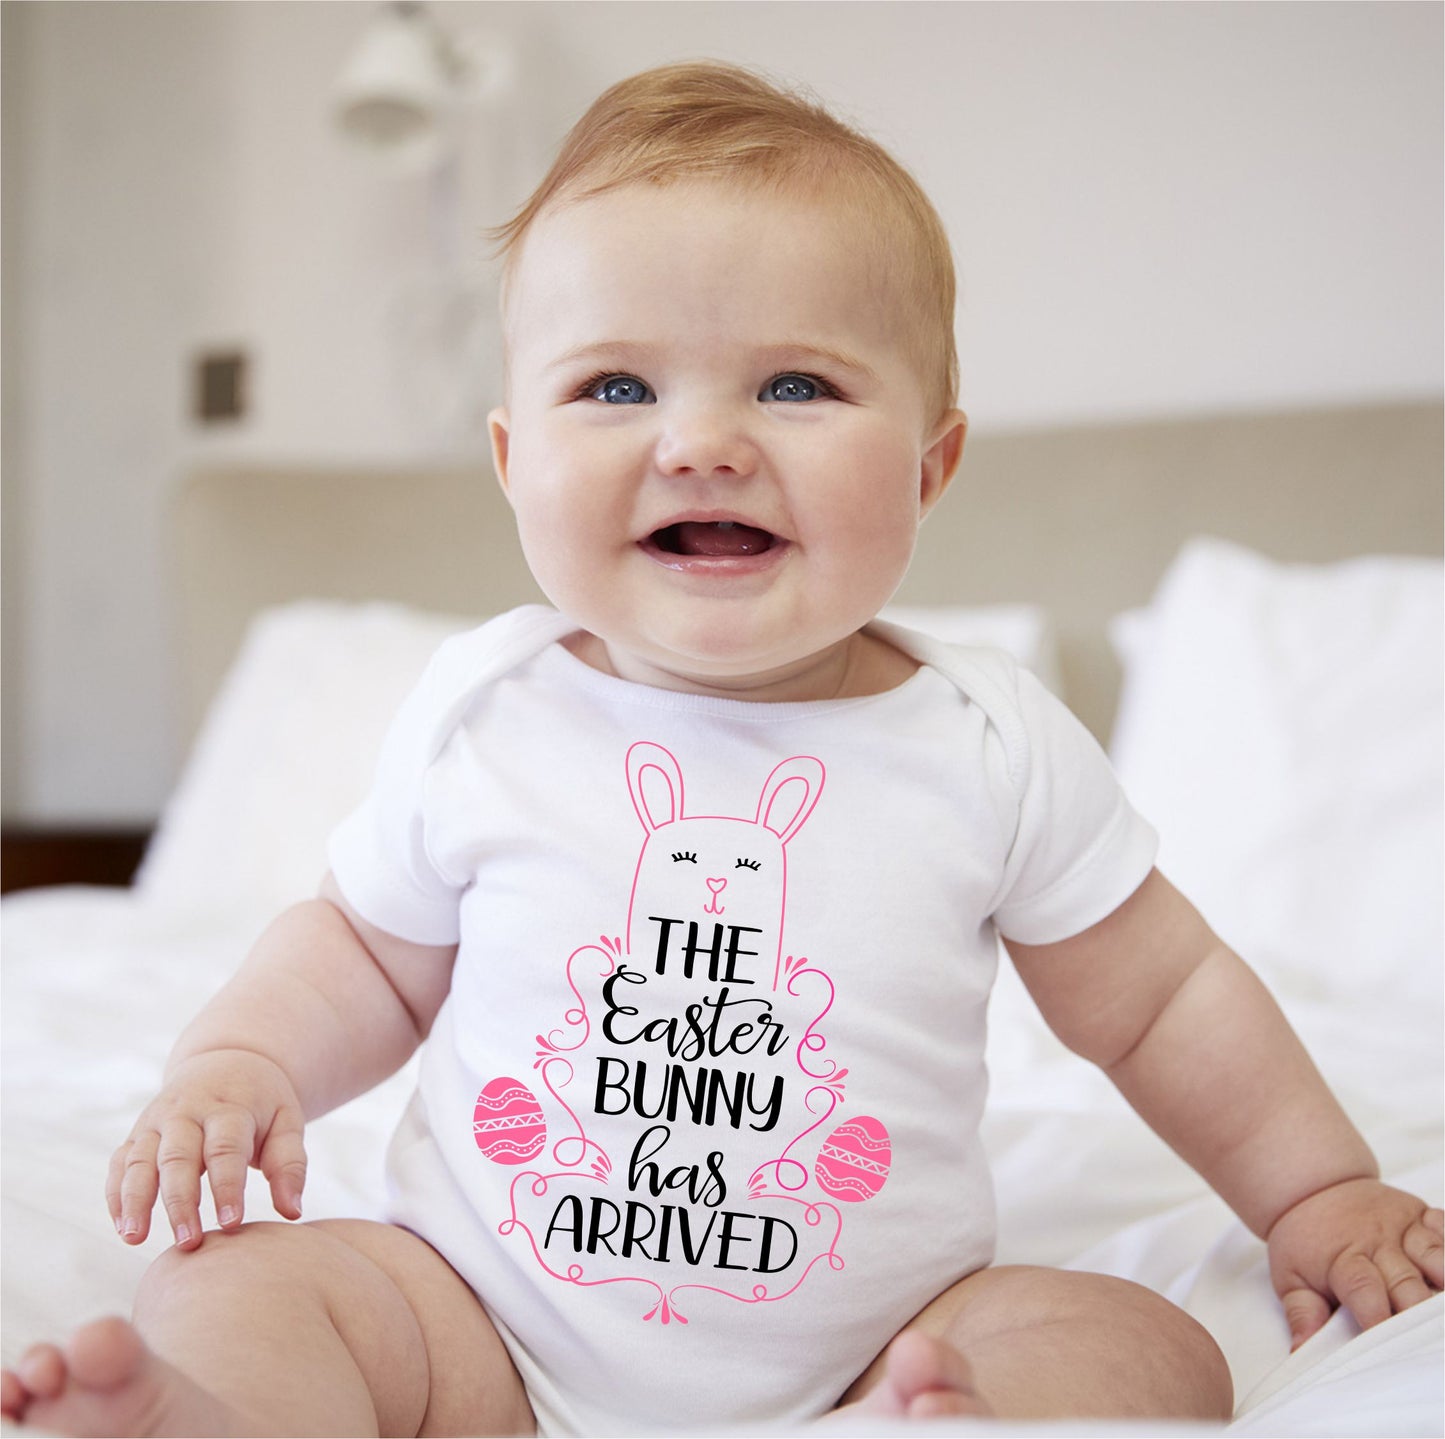 Baby Easter Onesies -  The Easter Bunny has arrived